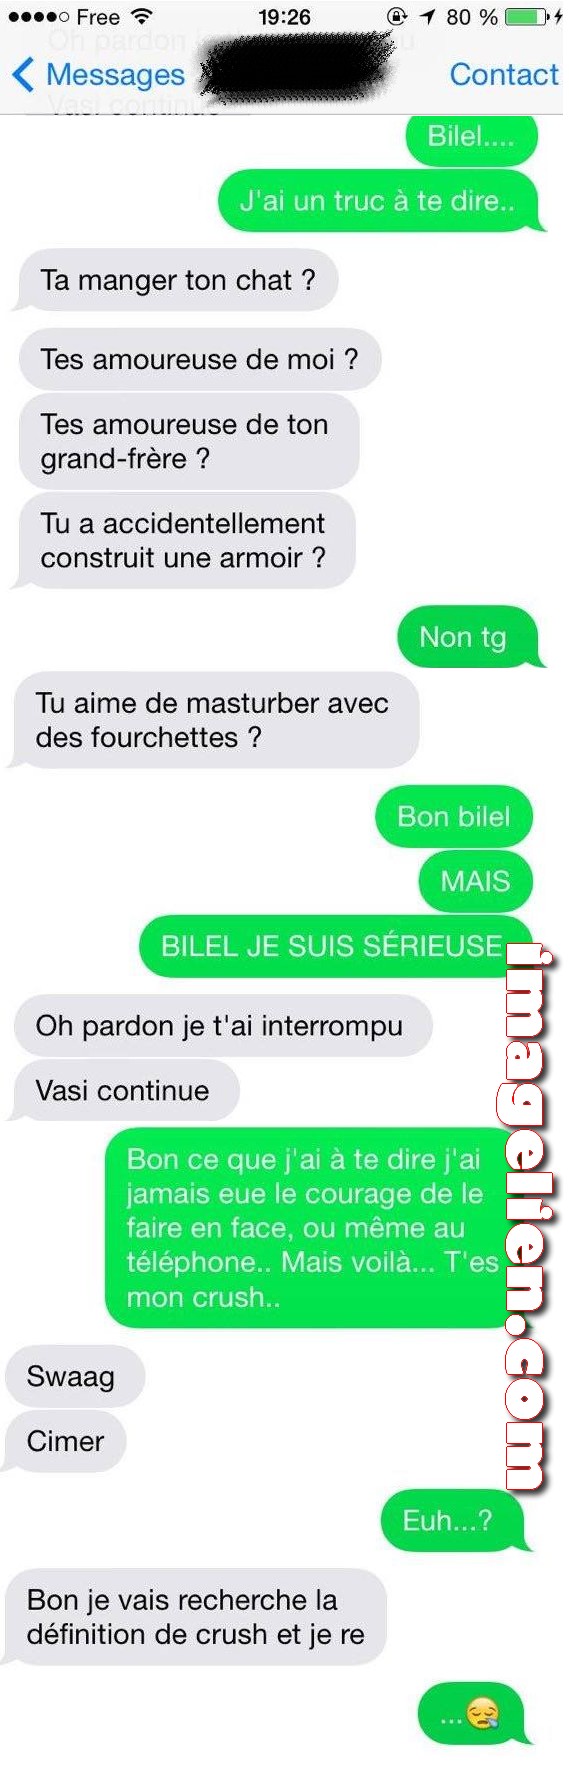 drole iphone sms424